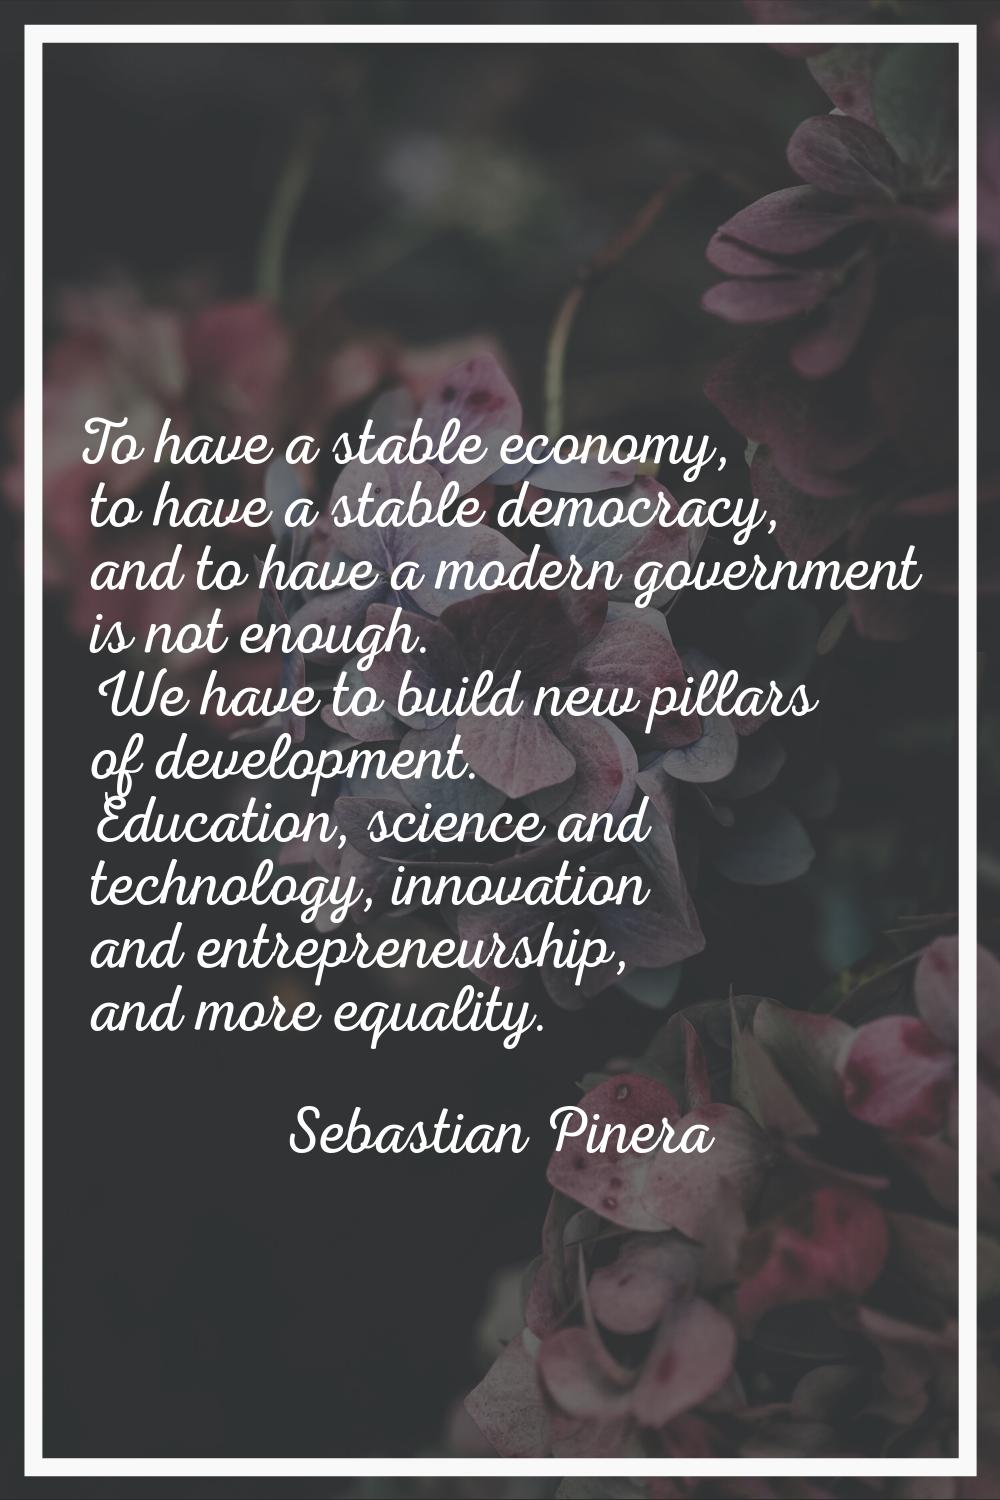 To have a stable economy, to have a stable democracy, and to have a modern government is not enough